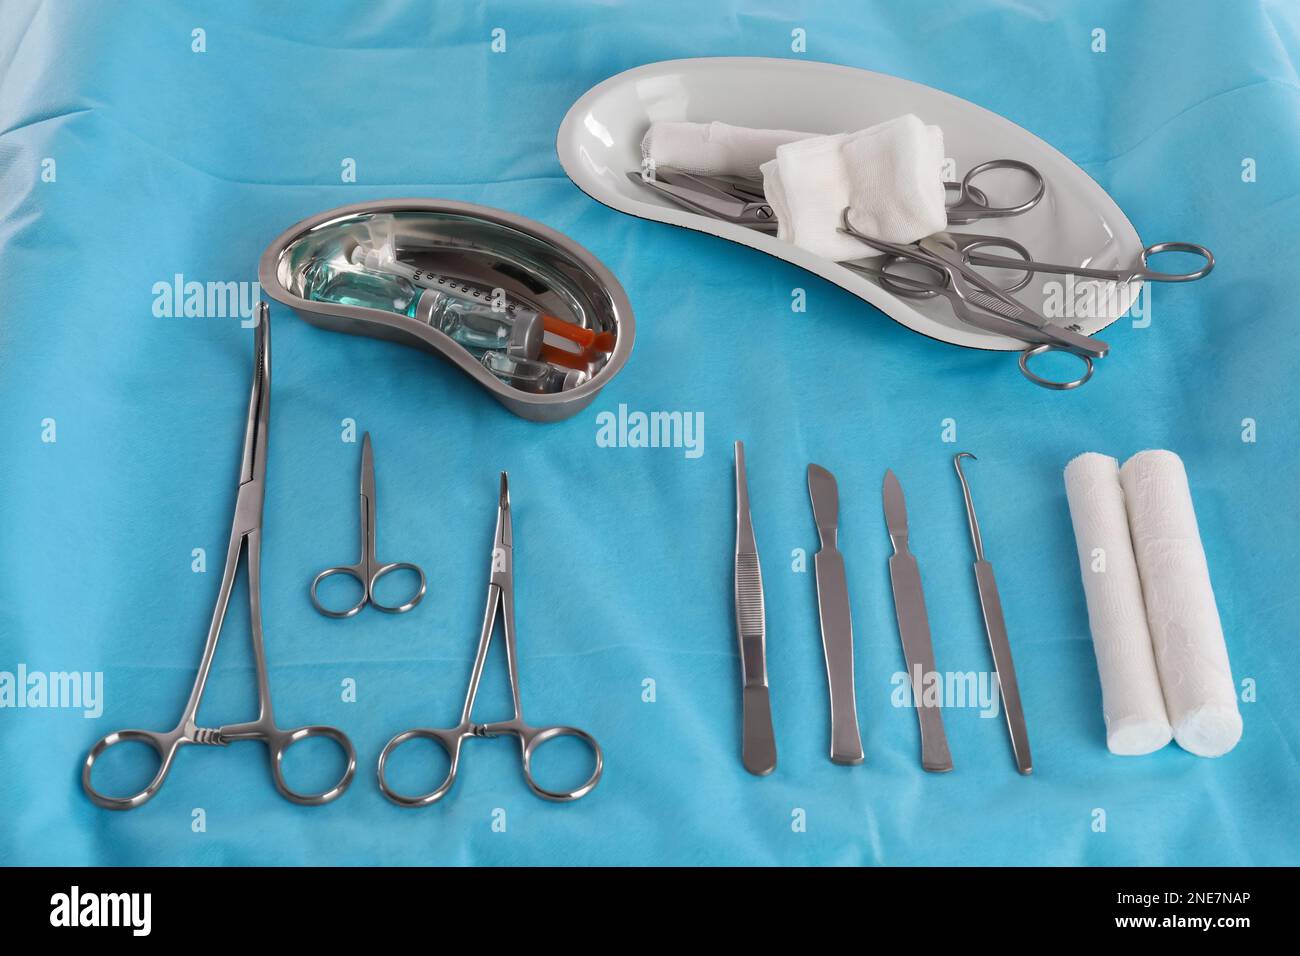 Set of different surgical instruments on table Stock Photo